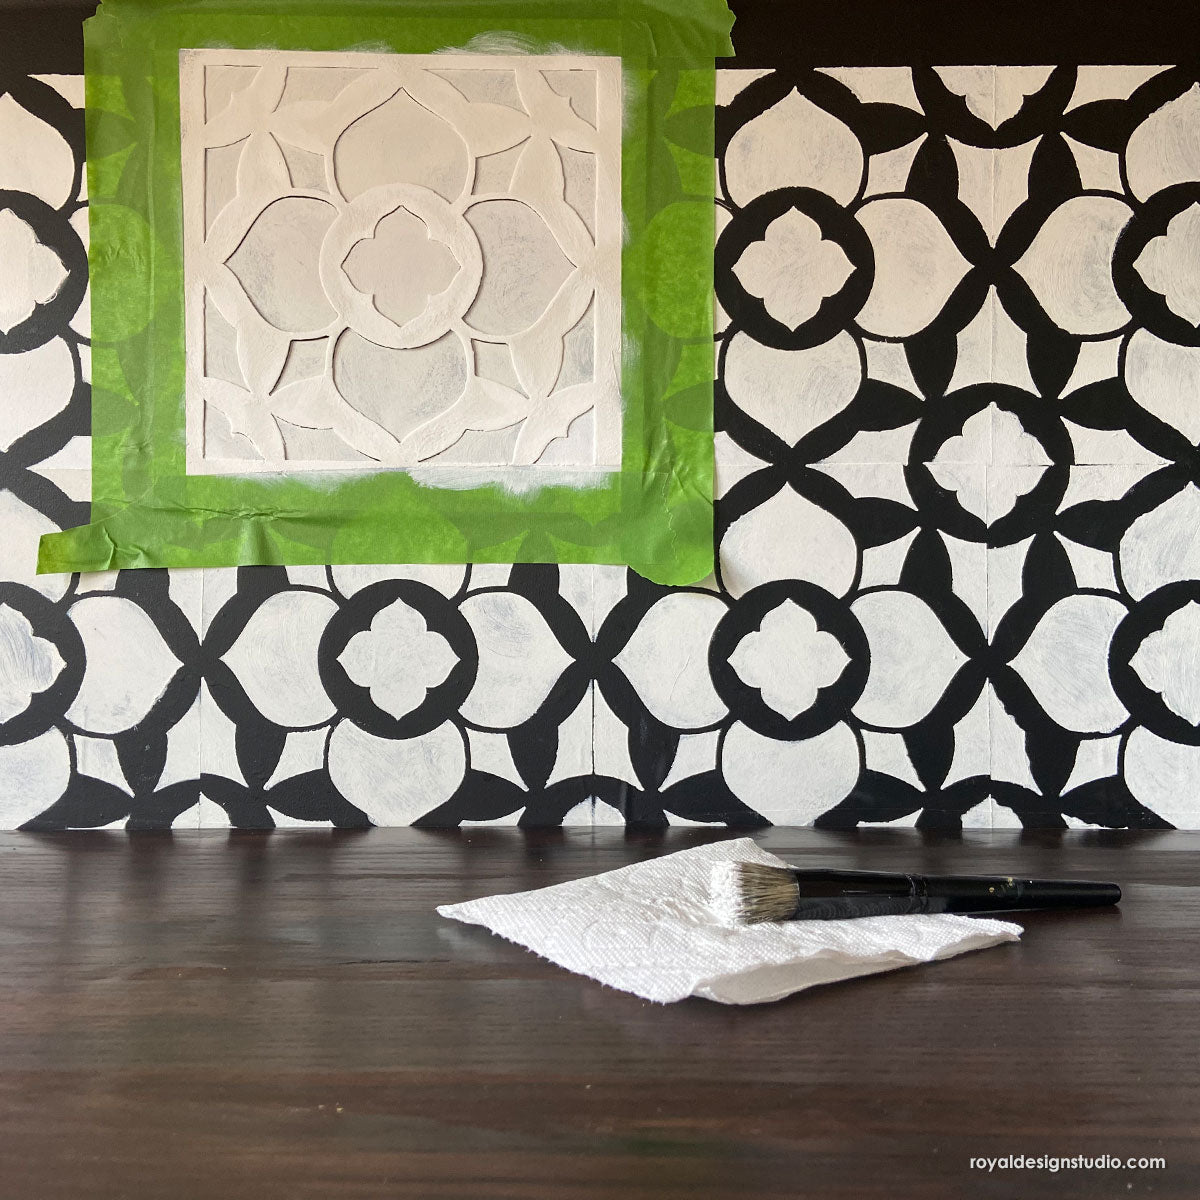 Large DIY Tile Stencils for Painting Walls and Floors